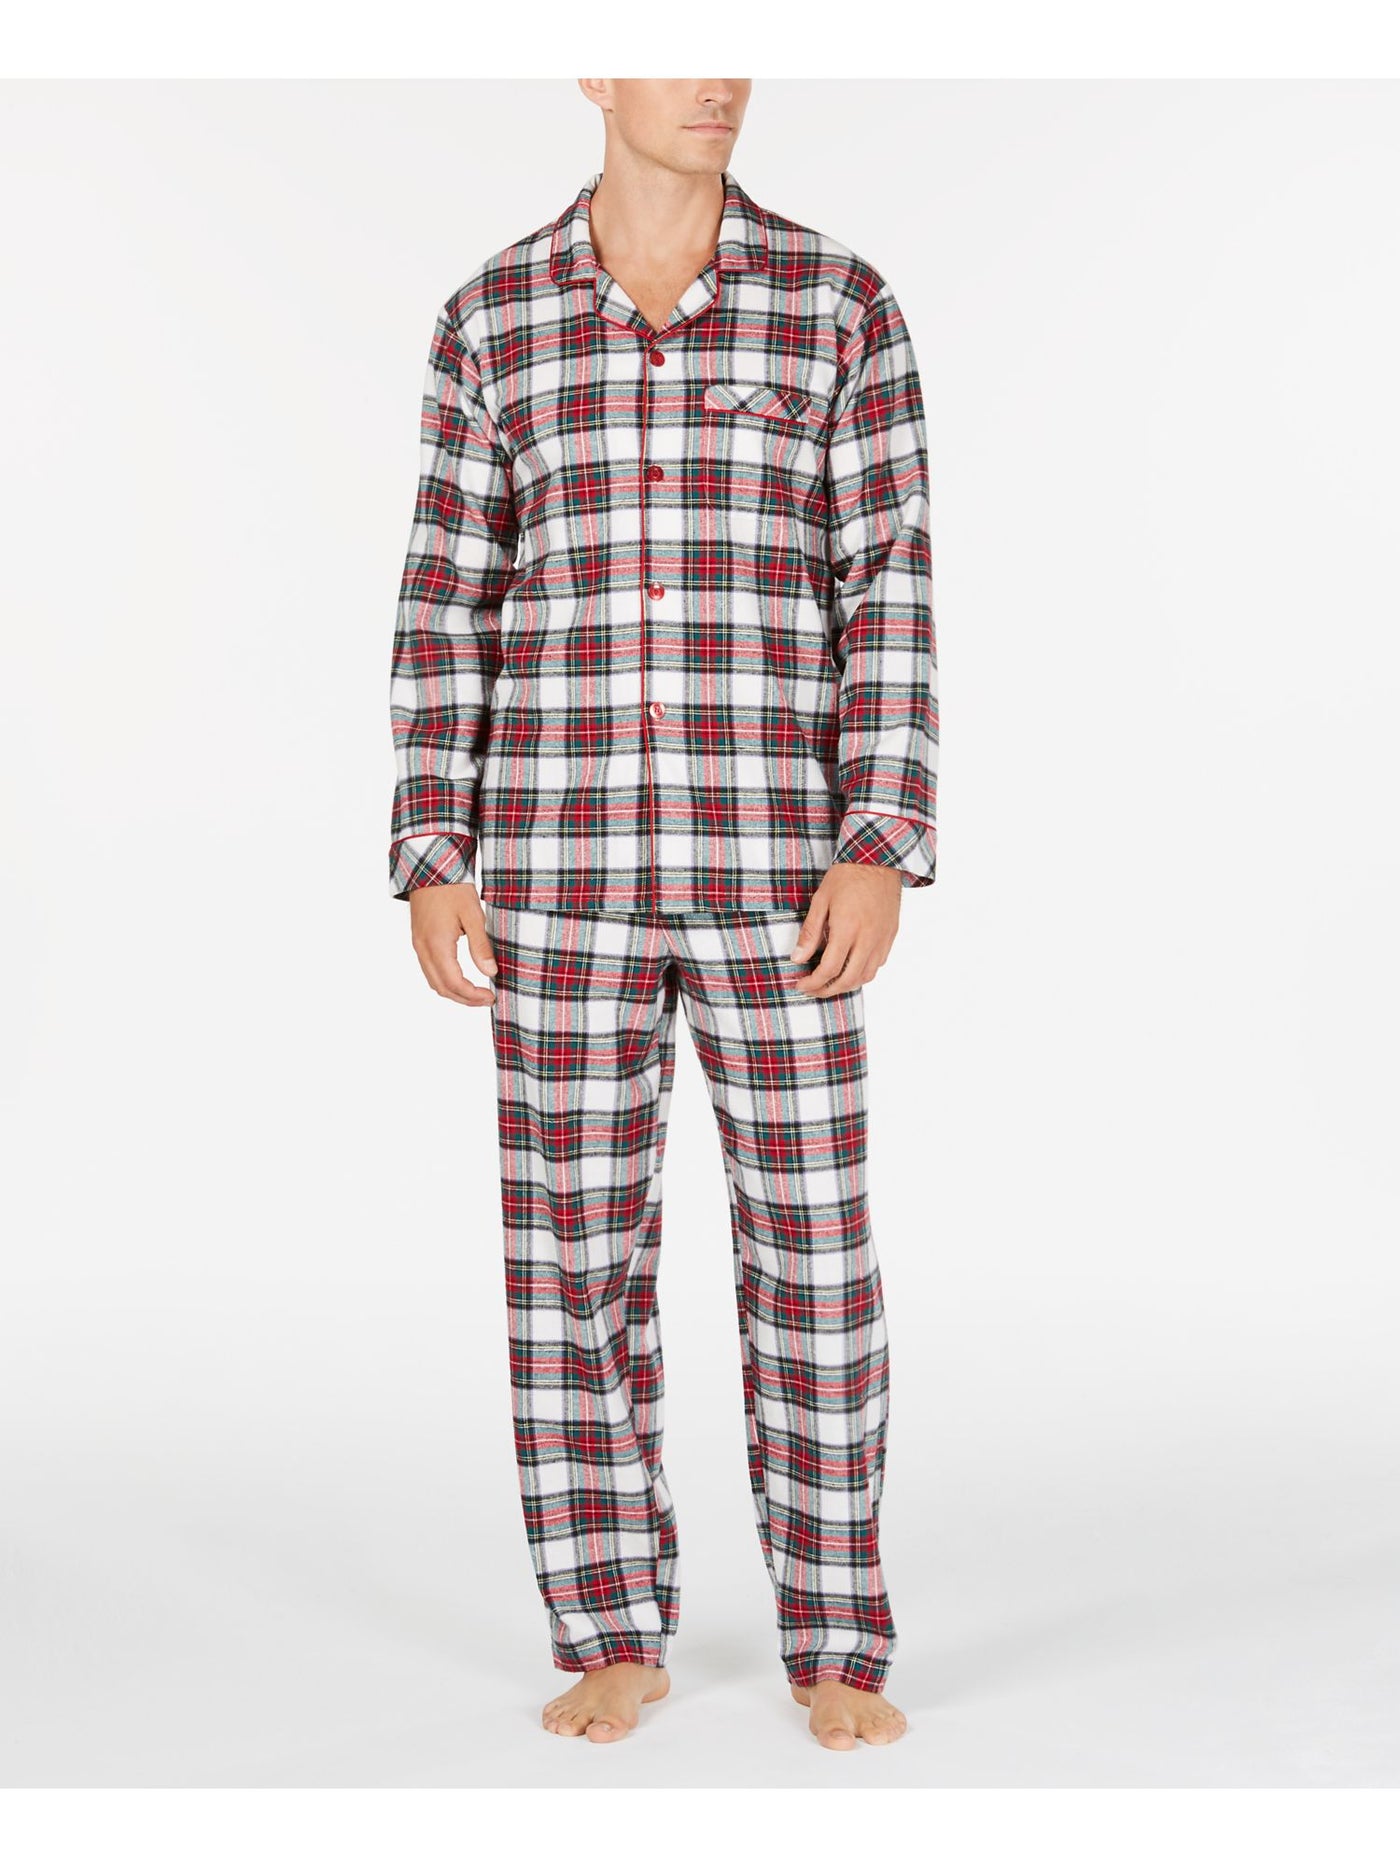 FAMILY PJs Mens White Plaid Pocketed Long Sleeve Button Up Top Straight leg Pants Pajamas L